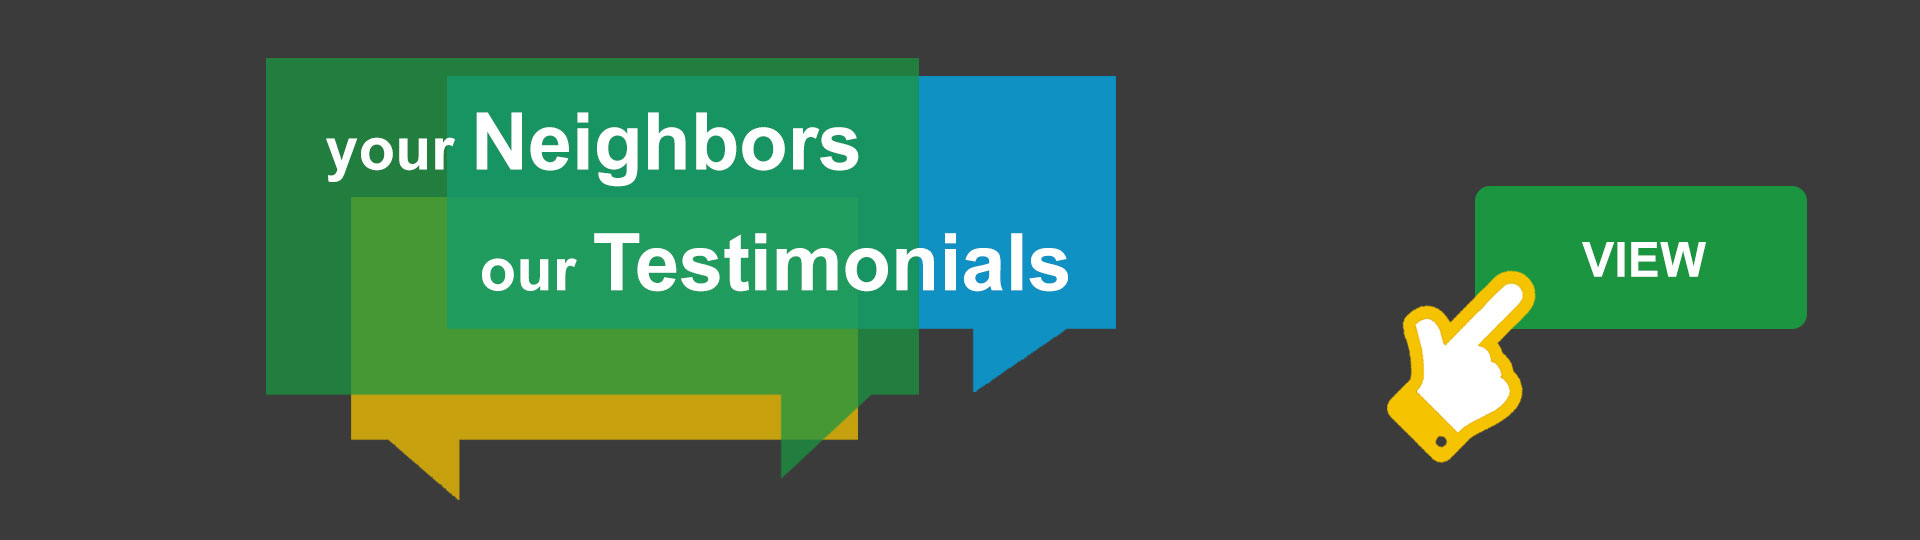 View Testimonials Clicked